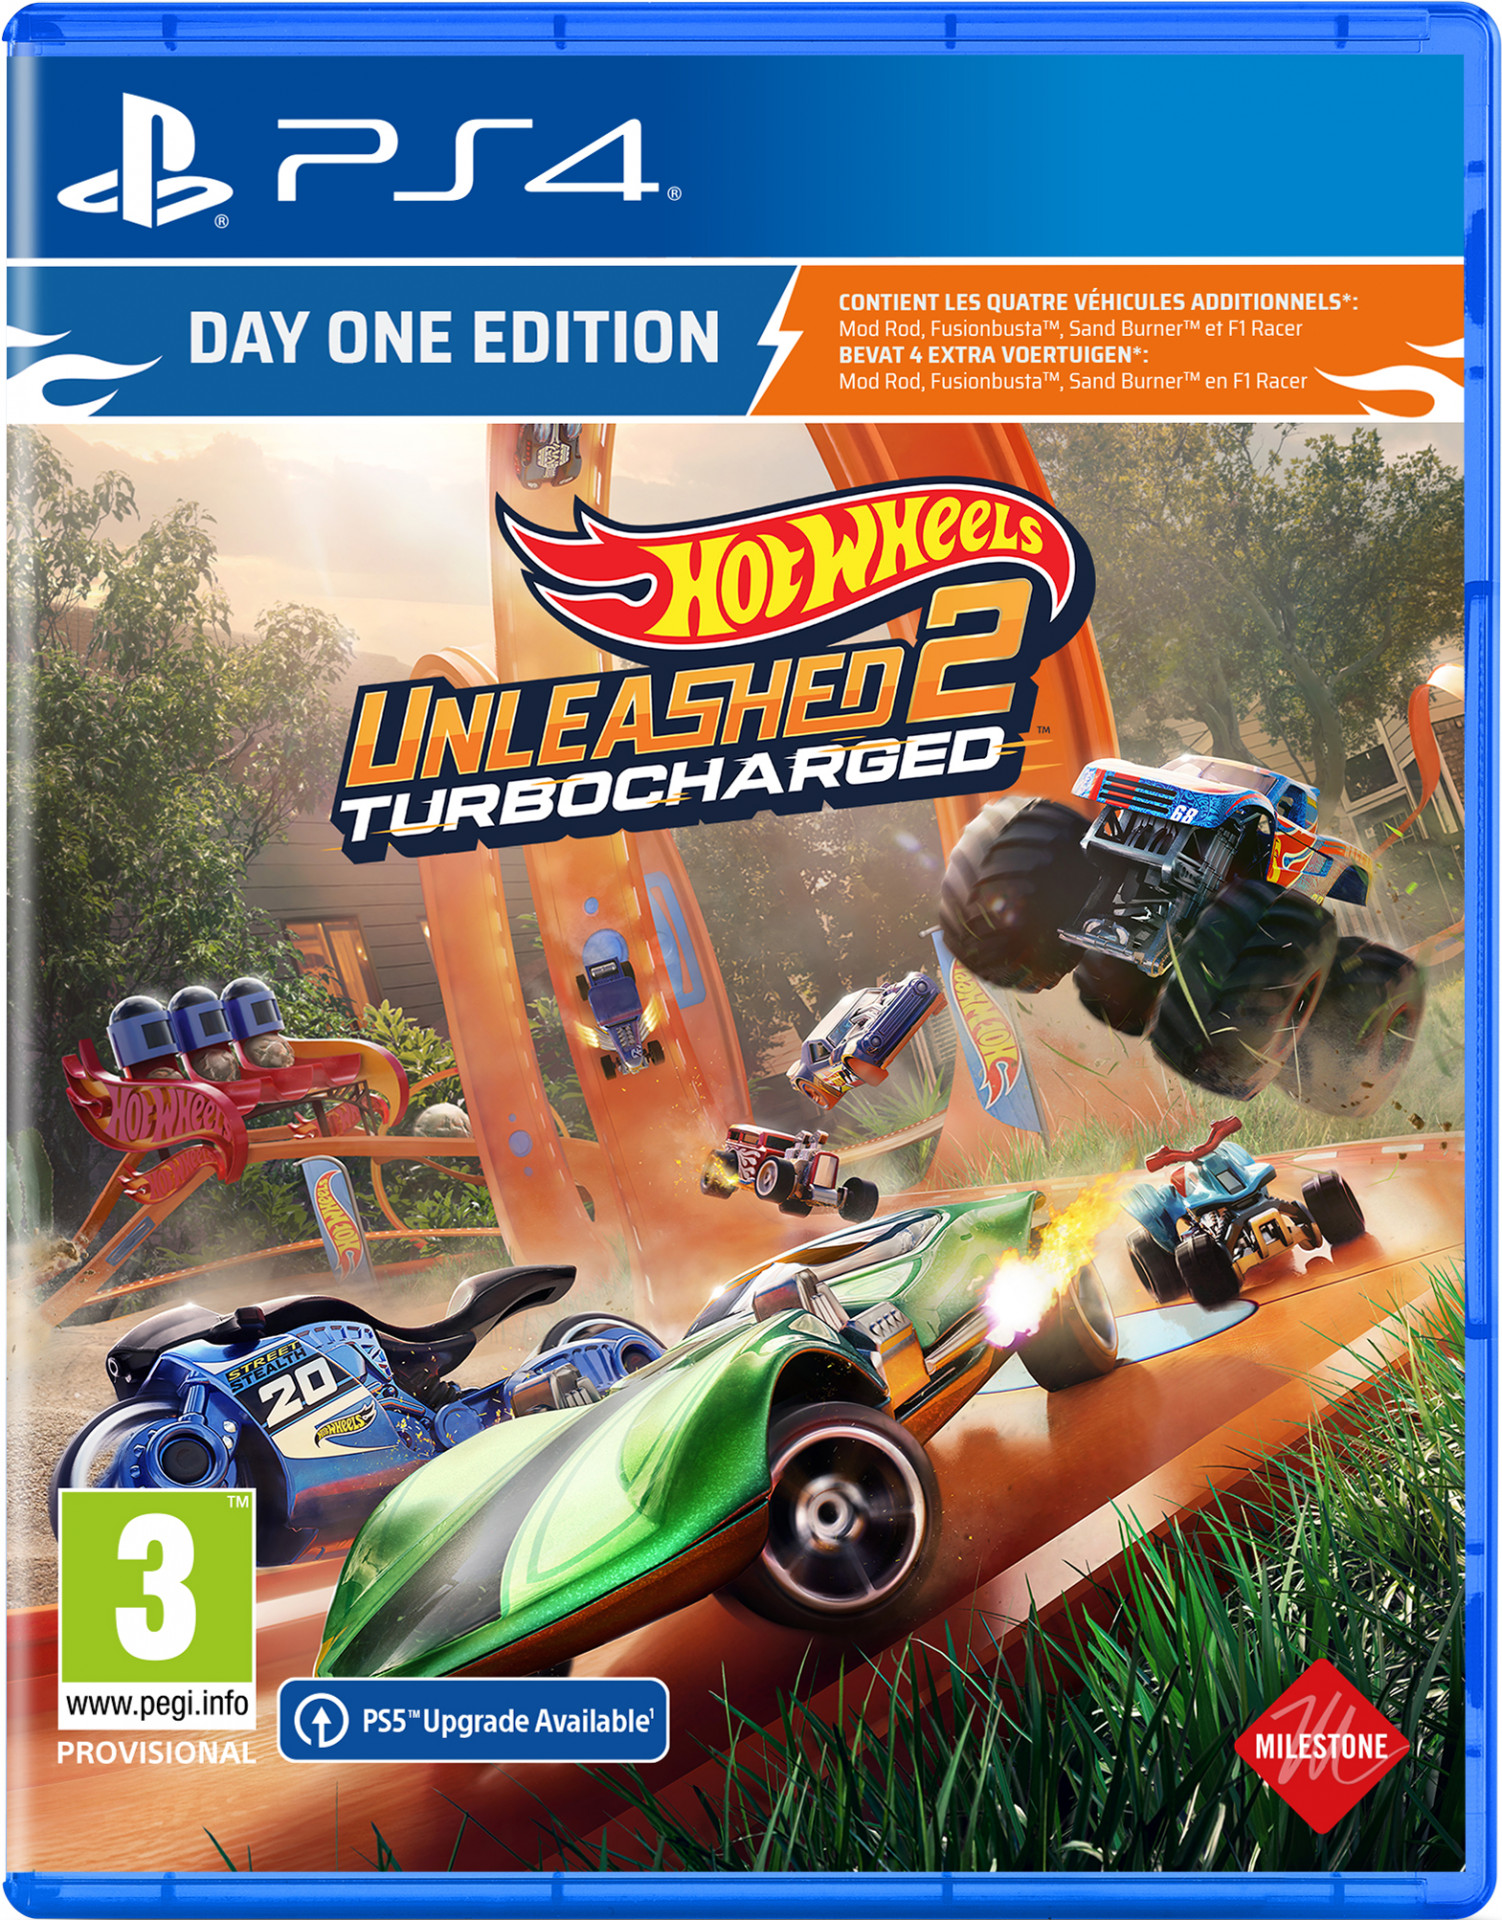 Hot Wheels Unleashed 2 - Day One Edition (PS4), Milestone